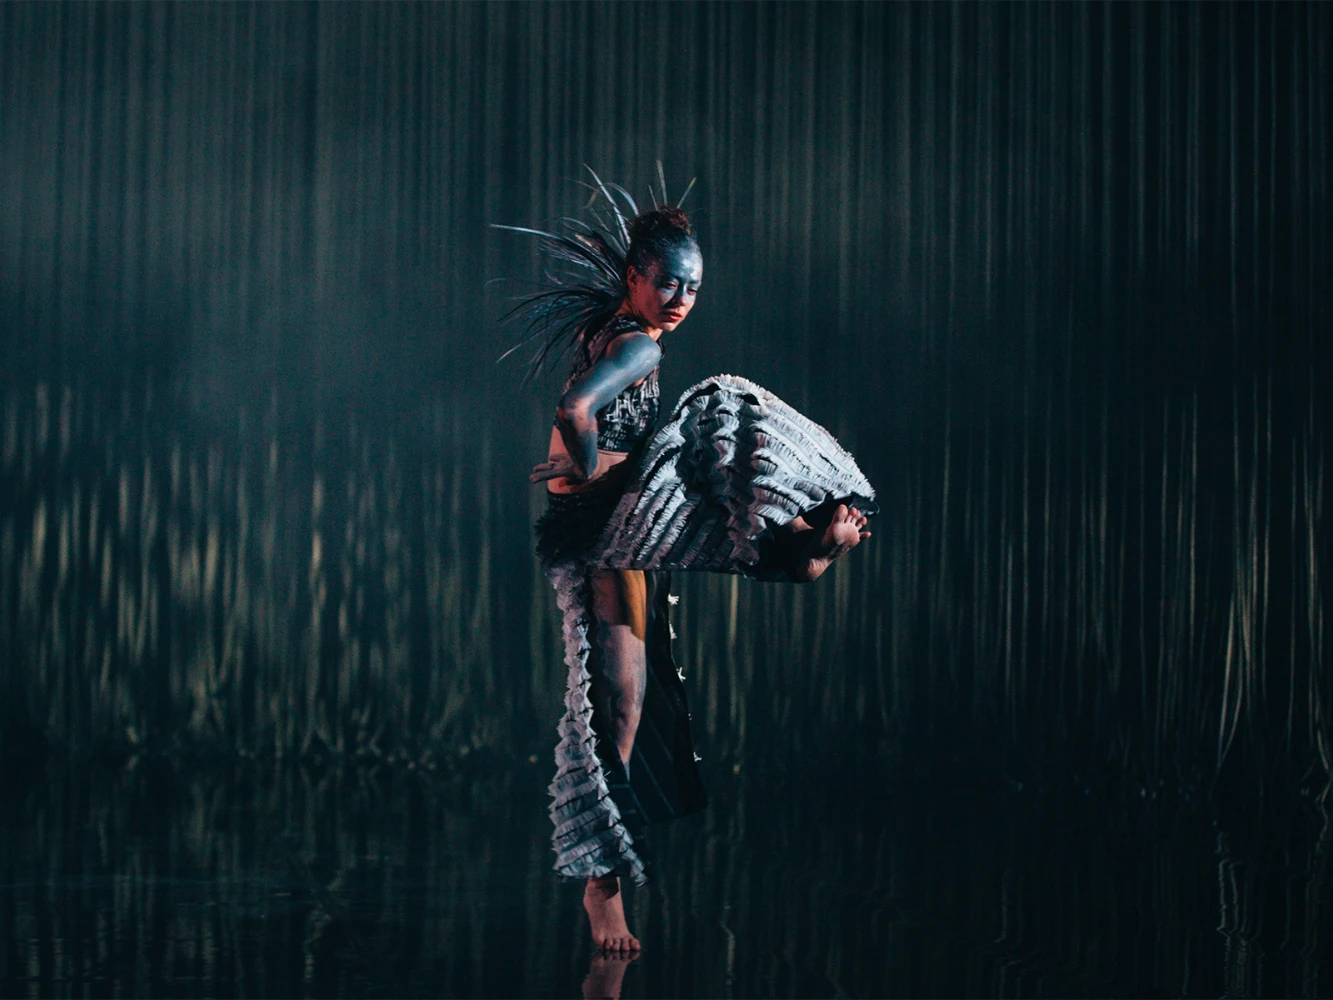 Yuldea presented by Bangarra Dance Theatre: What to expect - 2